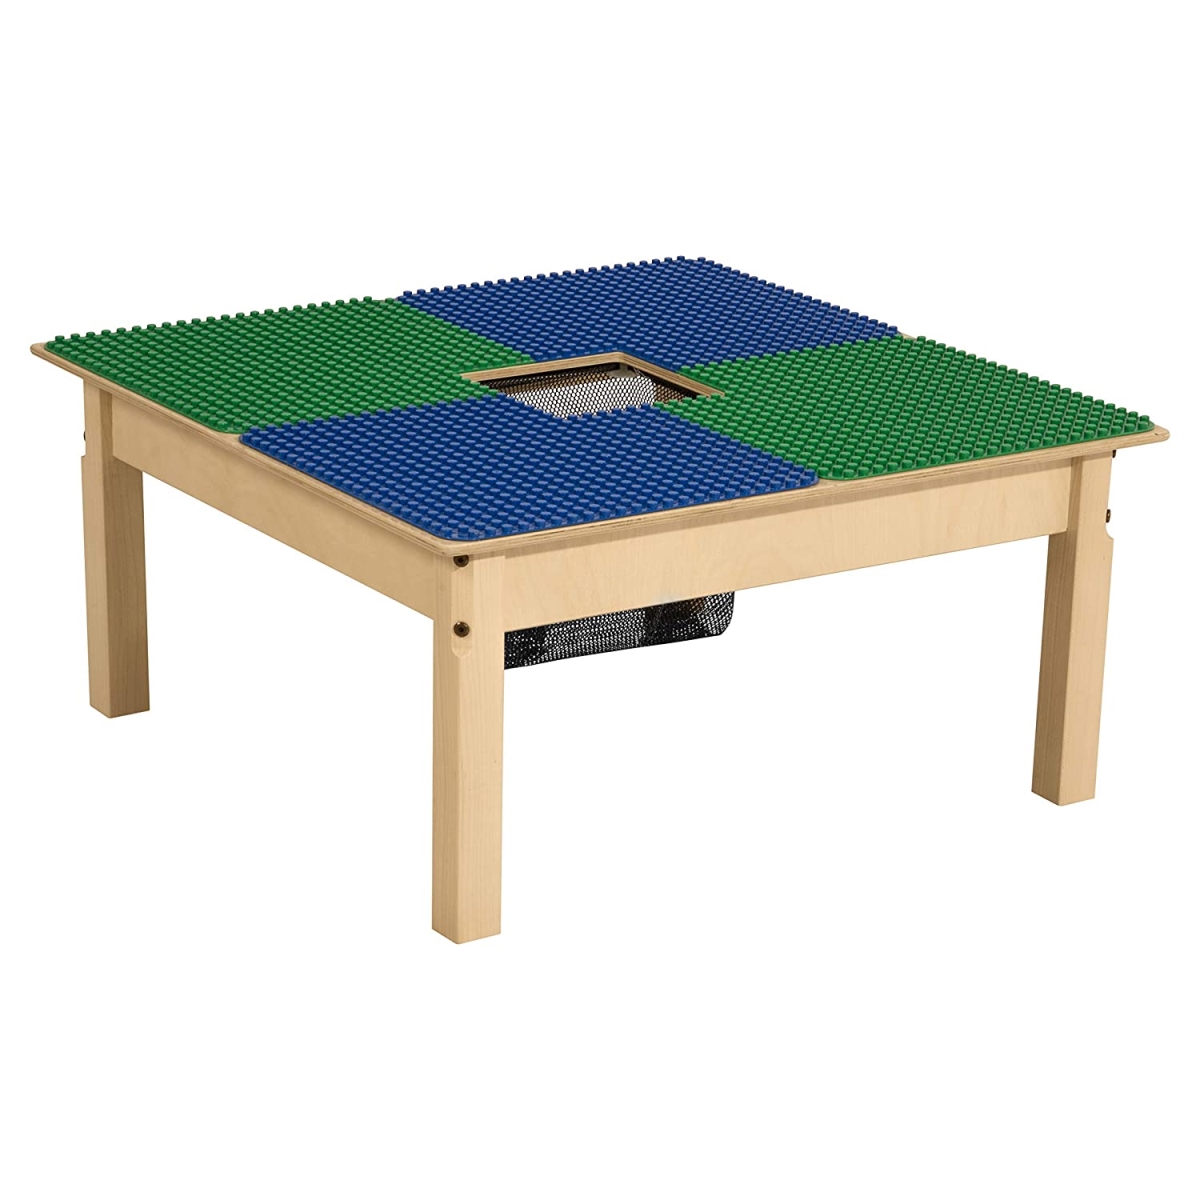 Tp3131pgn16-bg 16 In. Duplo Compatible Table With Legs, Blue & Green - Square